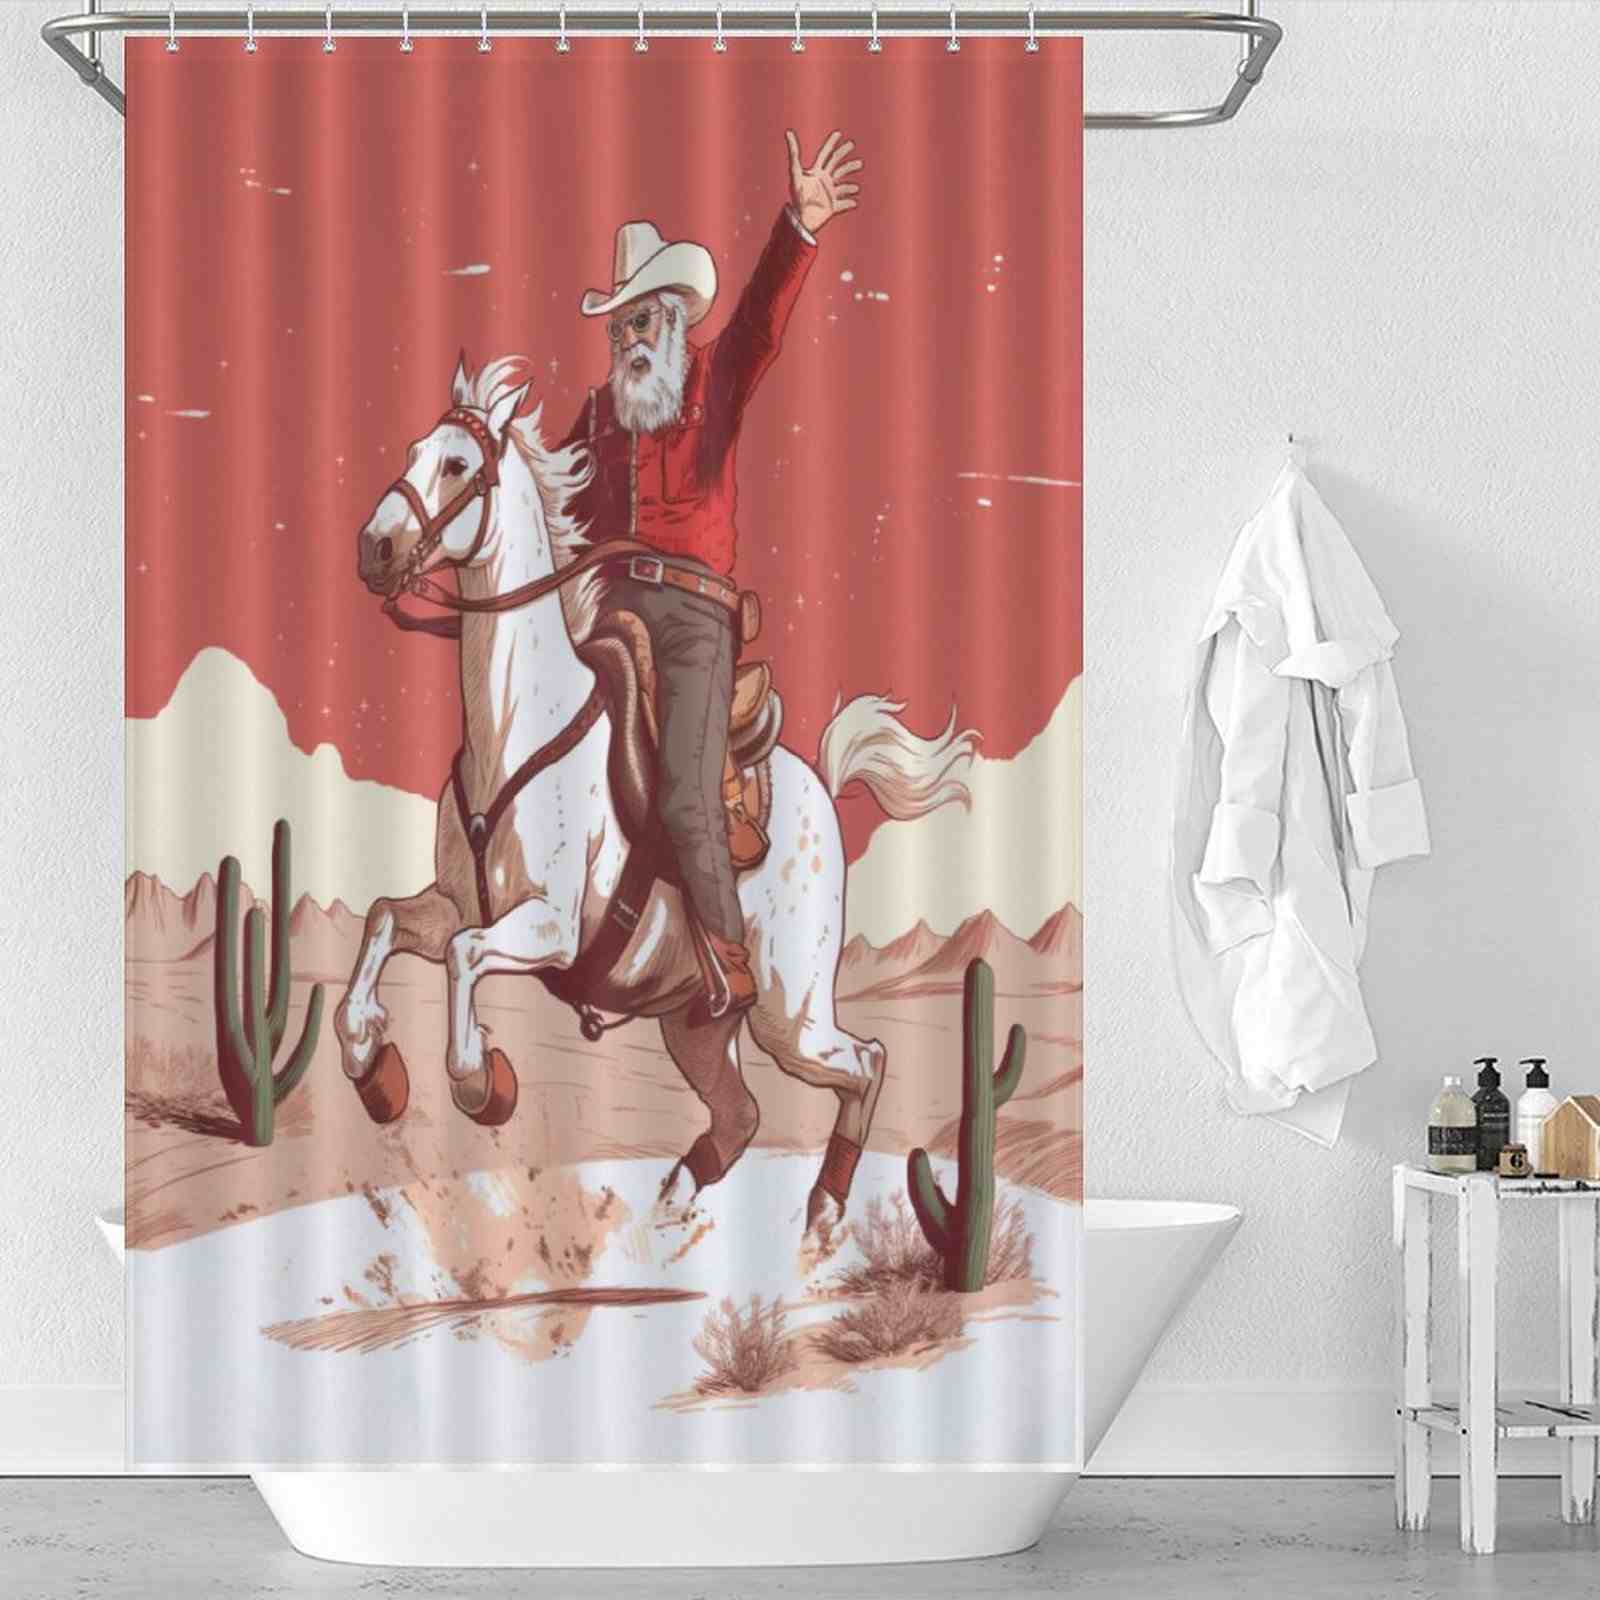 A Rustic Cowboy Santa Claus Shower Curtain by Cotton Cat, with a cowboy riding a horse.